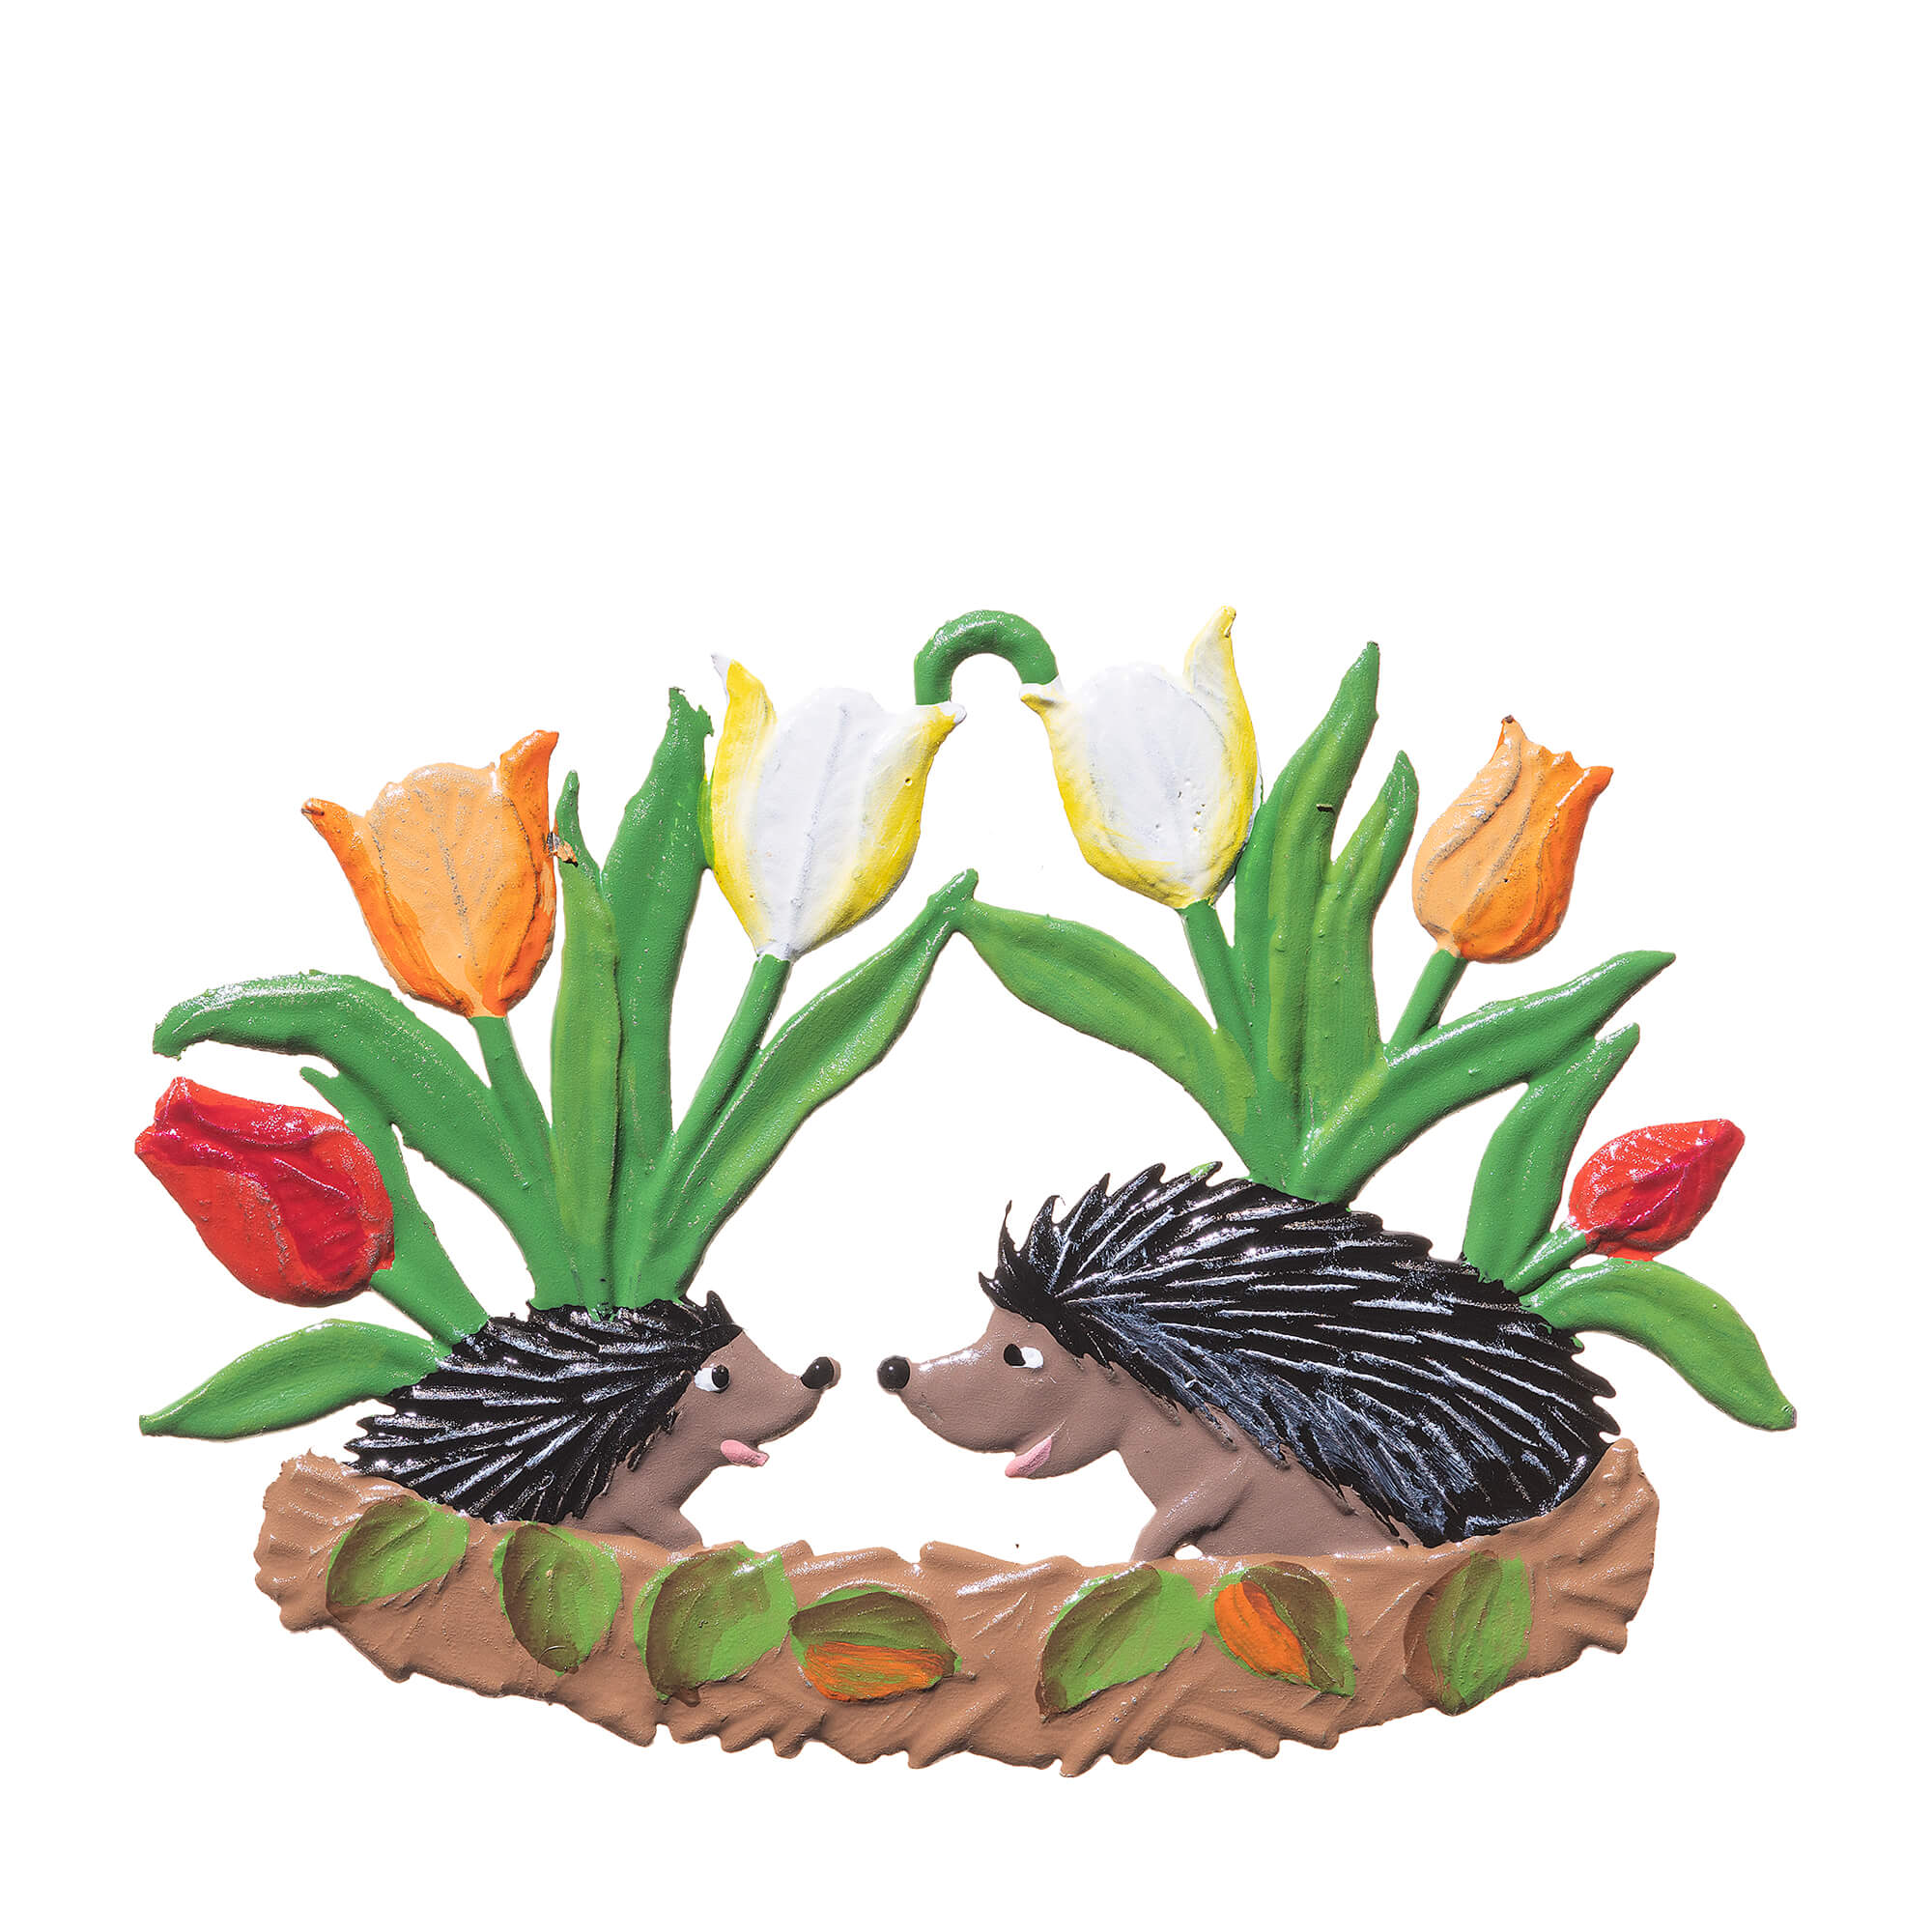 EO13 Hedgehogs with Tulips Ornament